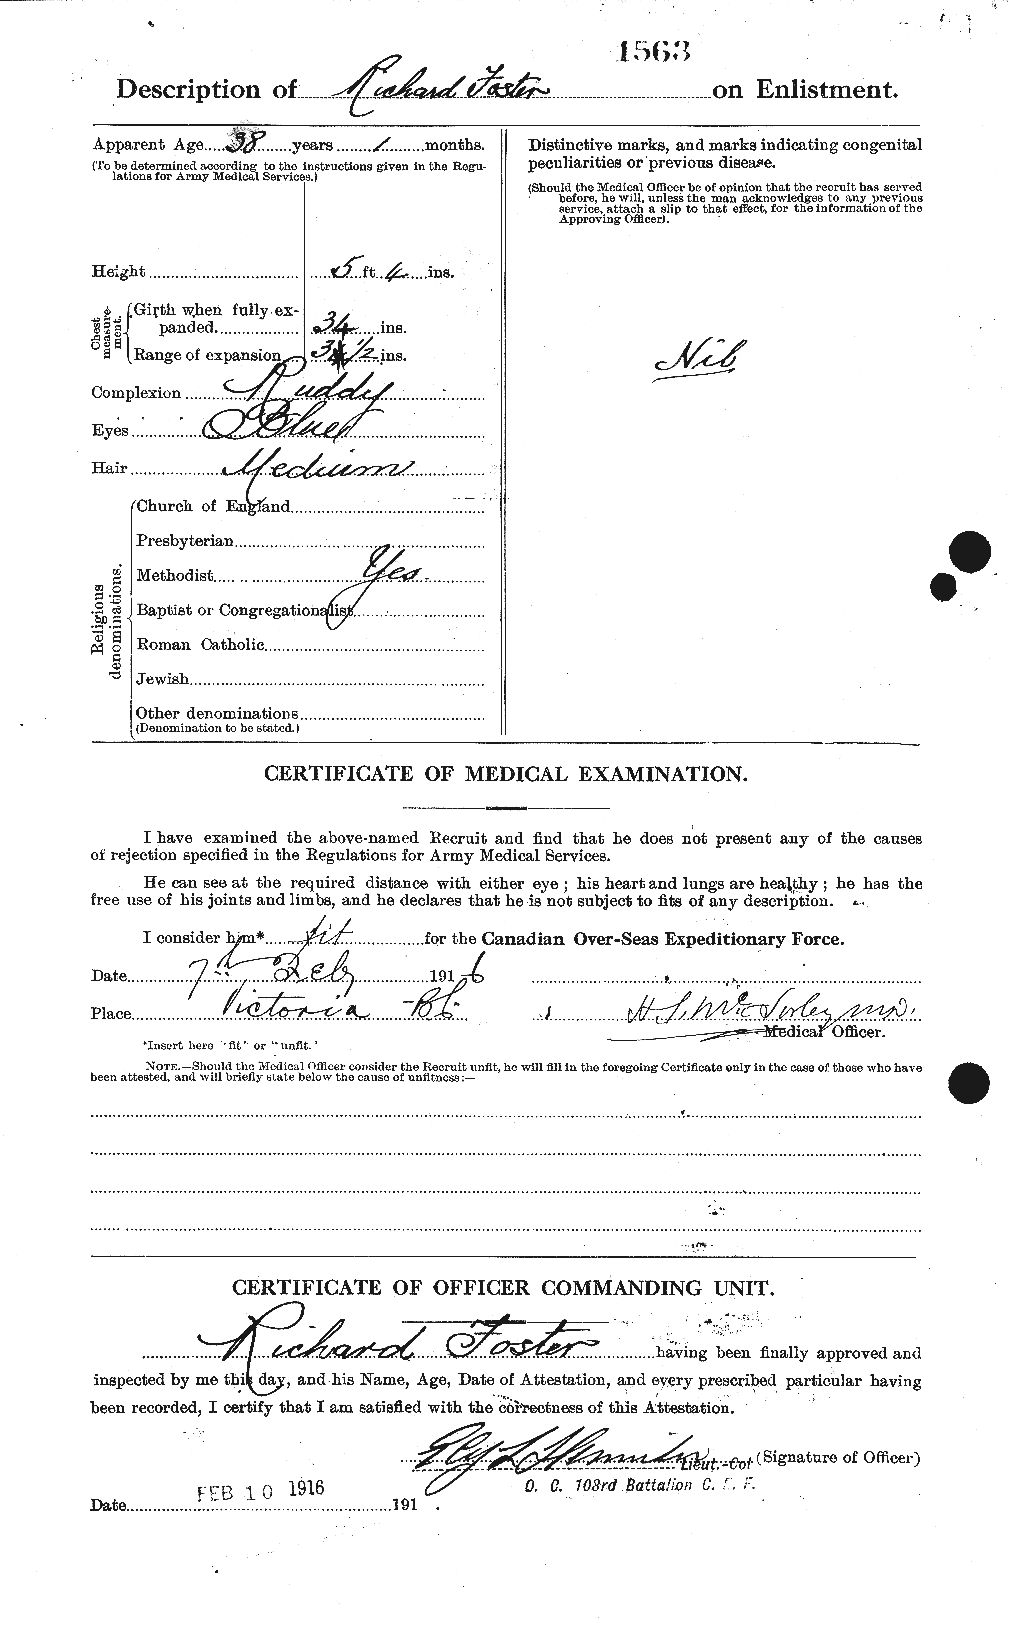 Personnel Records of the First World War - CEF 335155b